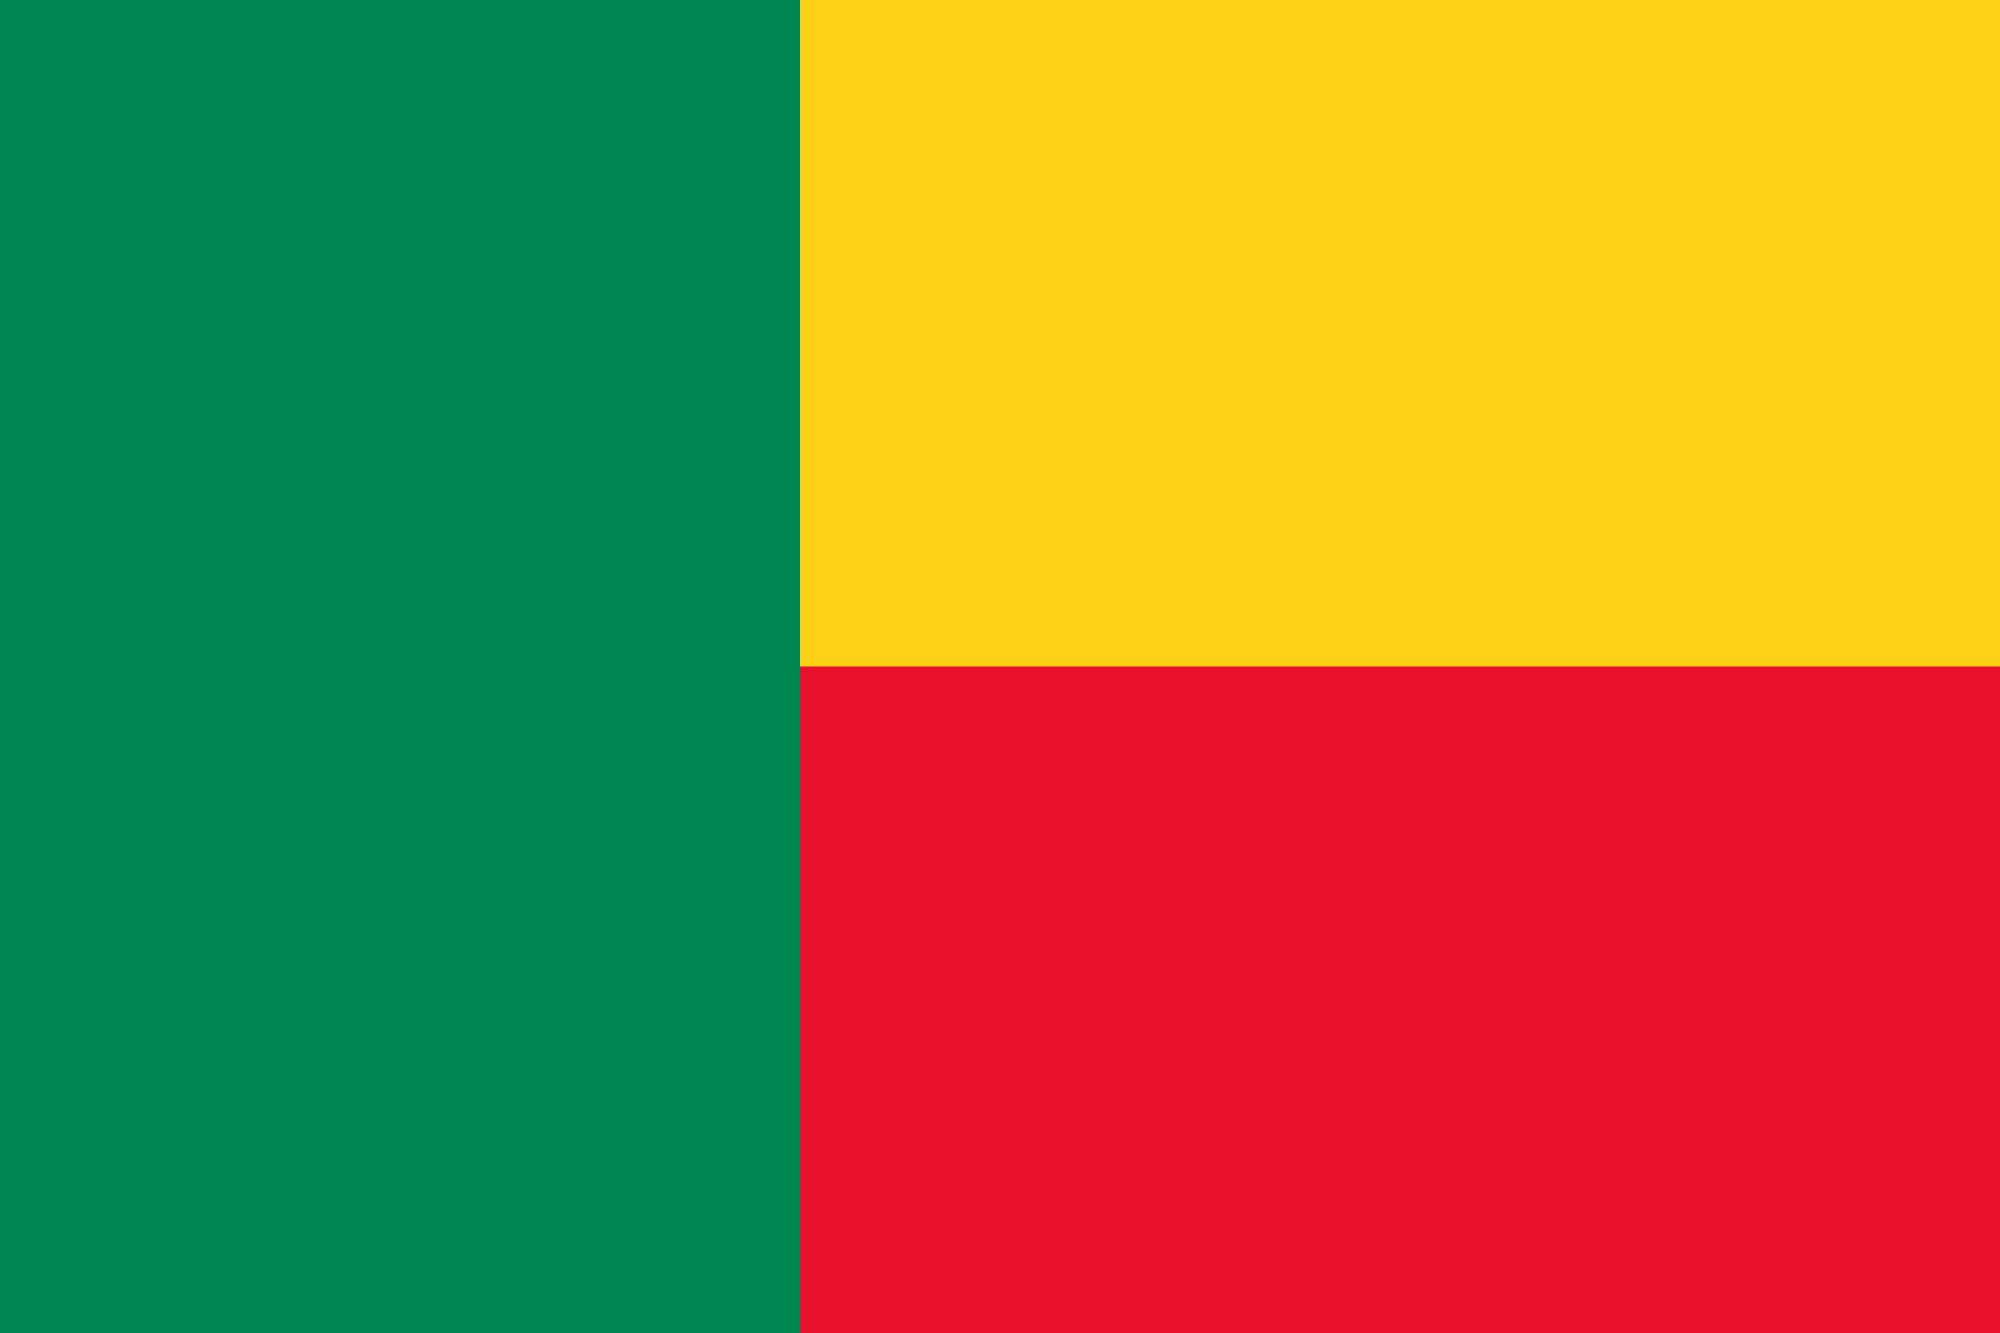 Development of a European Union program in the sector technical education and vocational training in Benin